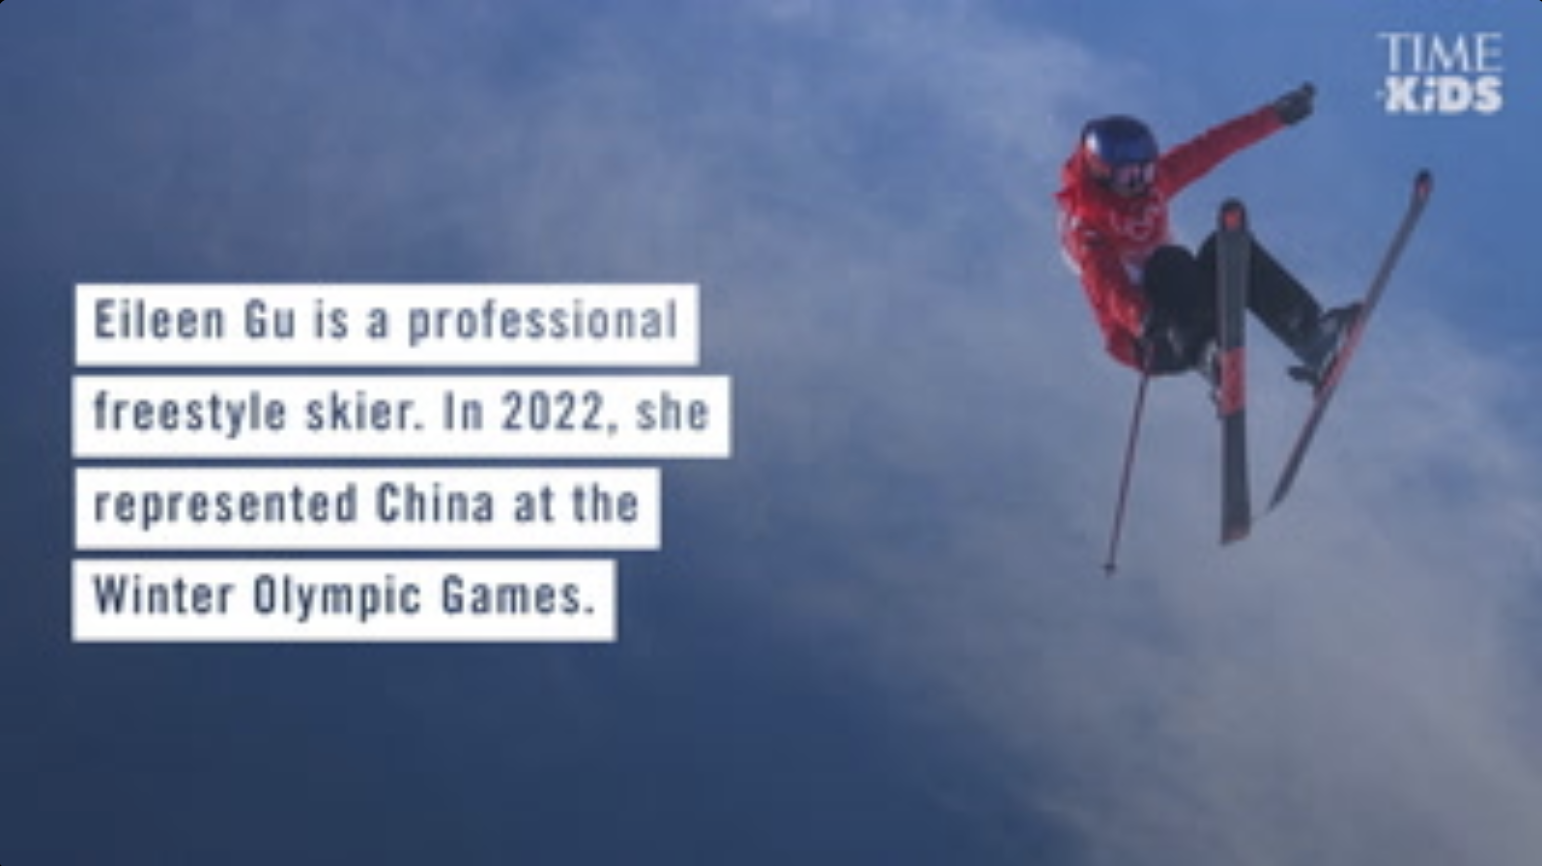 Photo of Eileen Gu airborne on her skis on the right with a caption overlay to the left that reads, "Eileen Gu is a professional freestyle skier. In 2022, she represented China at the Winter Olympic Games."